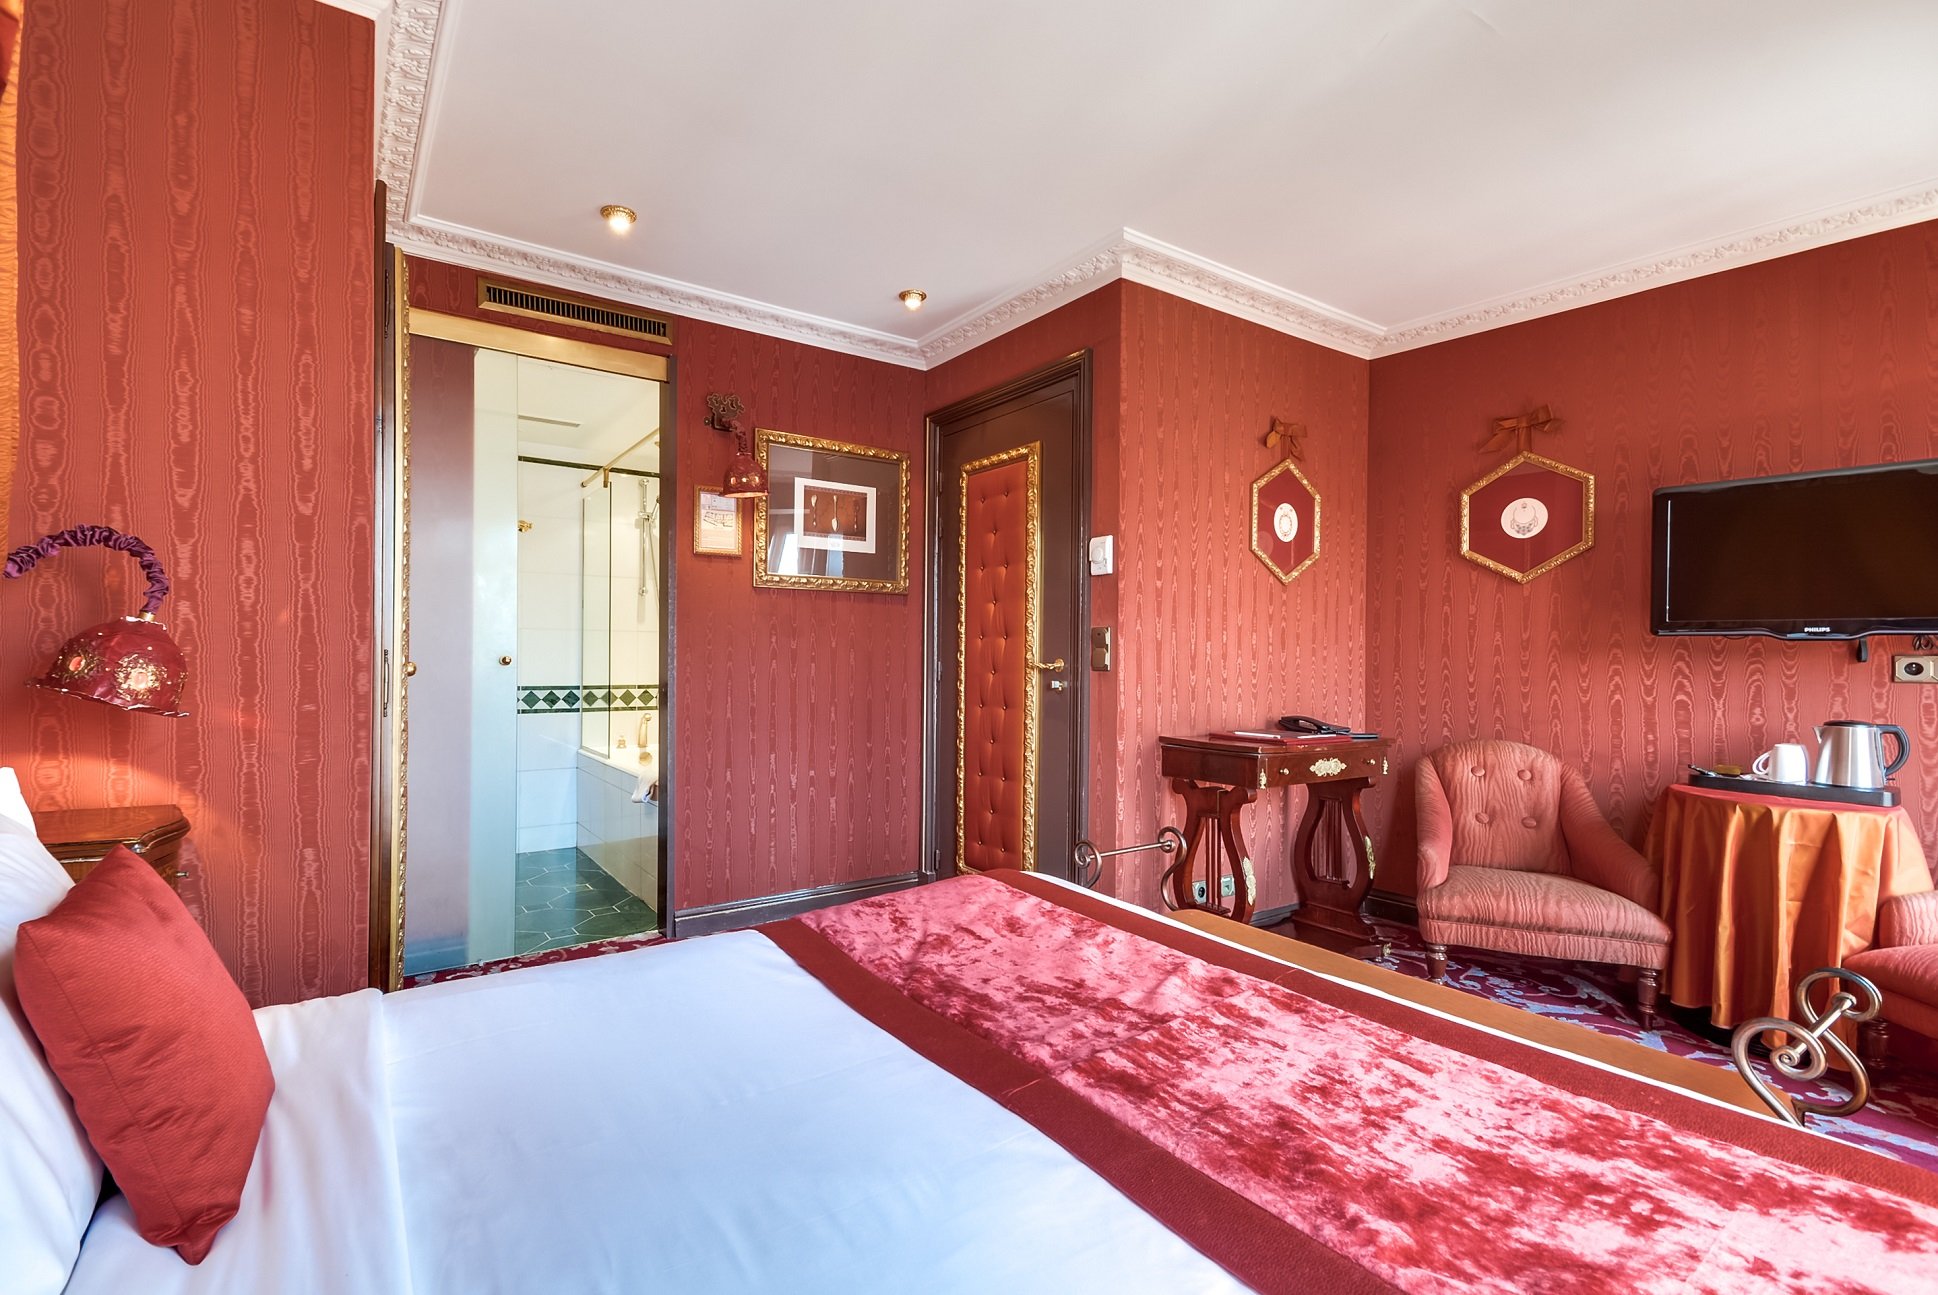 49/Chambres/Chambre - Pigalle - Montmartre.jpg